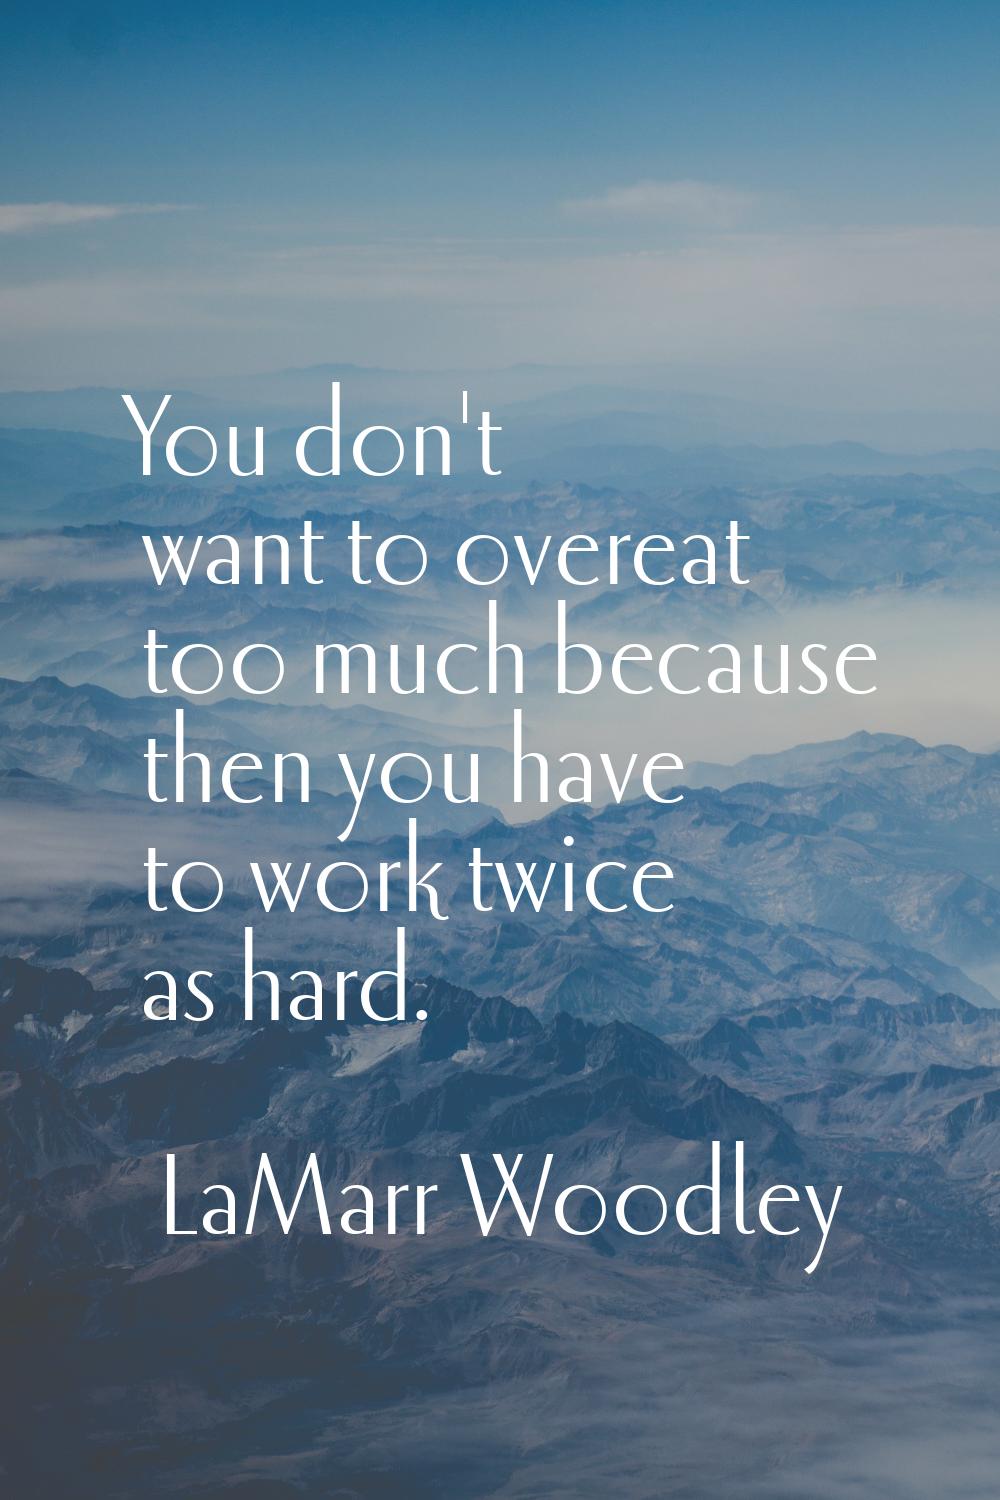 You don't want to overeat too much because then you have to work twice as hard.